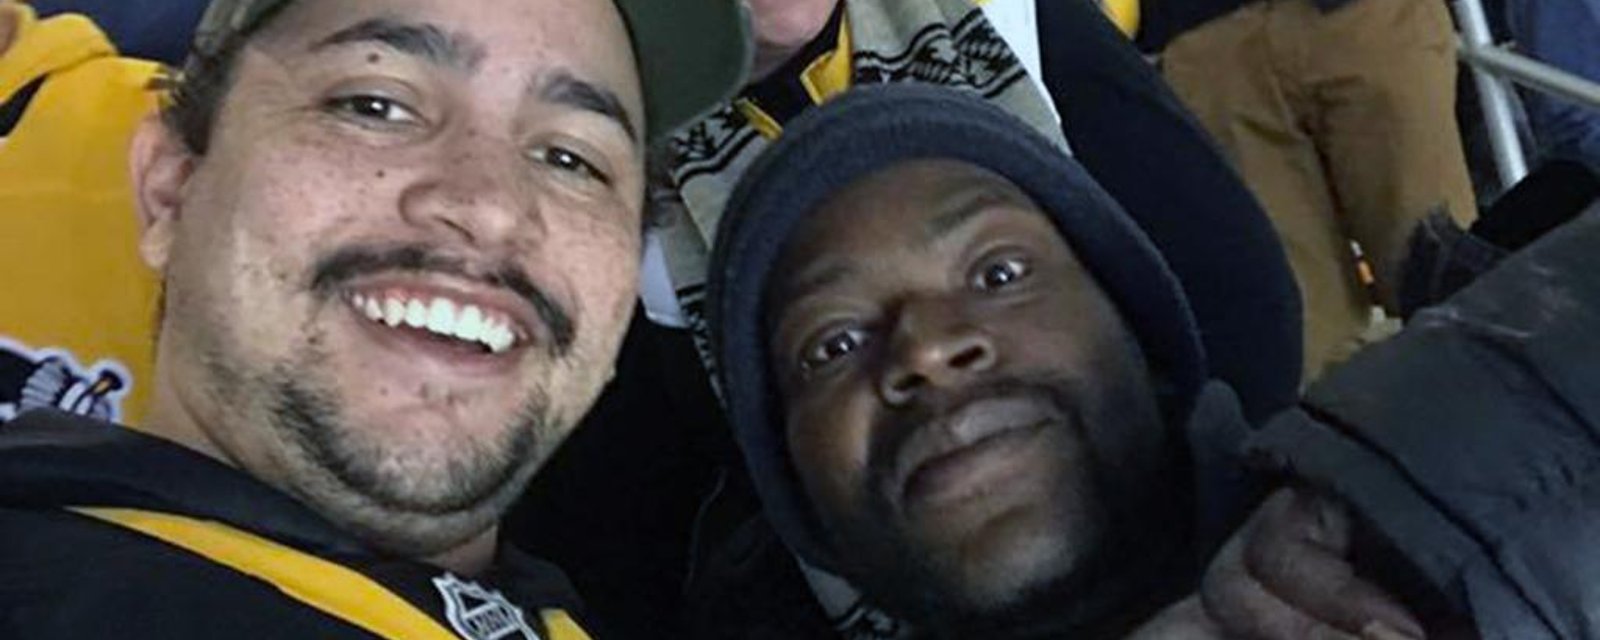 Pittsburgh's fan proves Penguins have the best crowd in the league. 